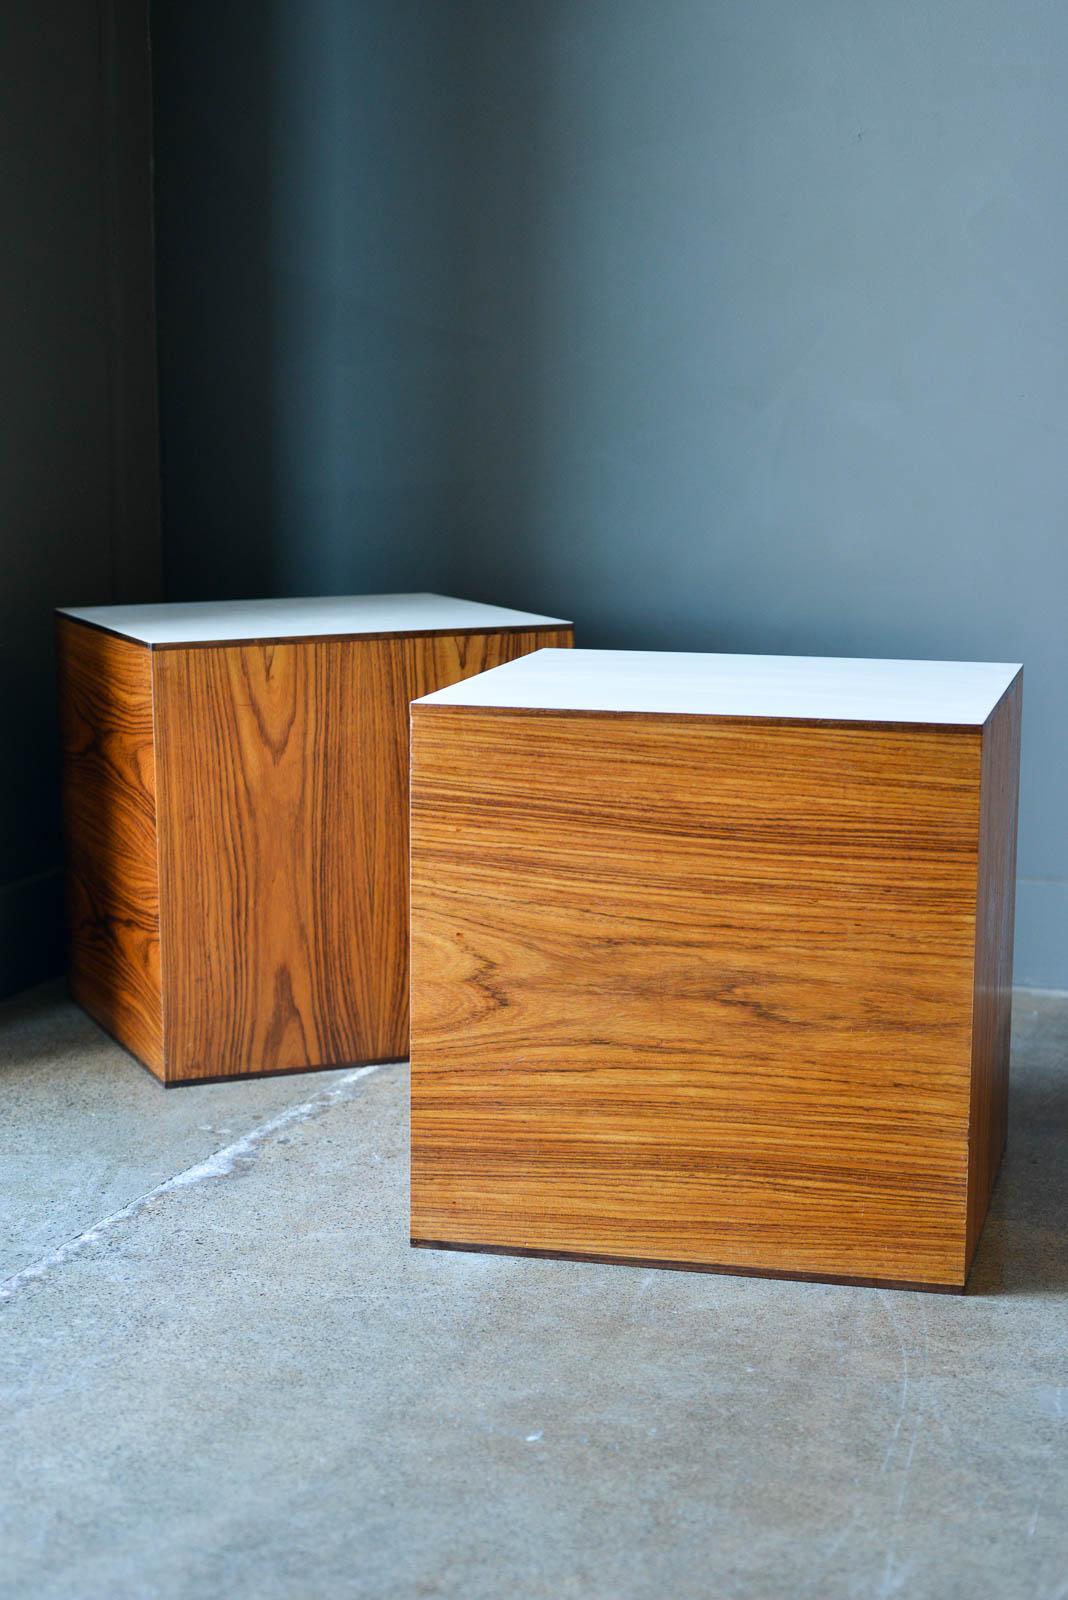 Pair of Rosewood end tables or pedestals by Milo Baughman, 1970. Beautiful rosewood grained tables with original white laminate tops on one side. Tables are in very good original condition with only slight wear. White laminate is also very good with